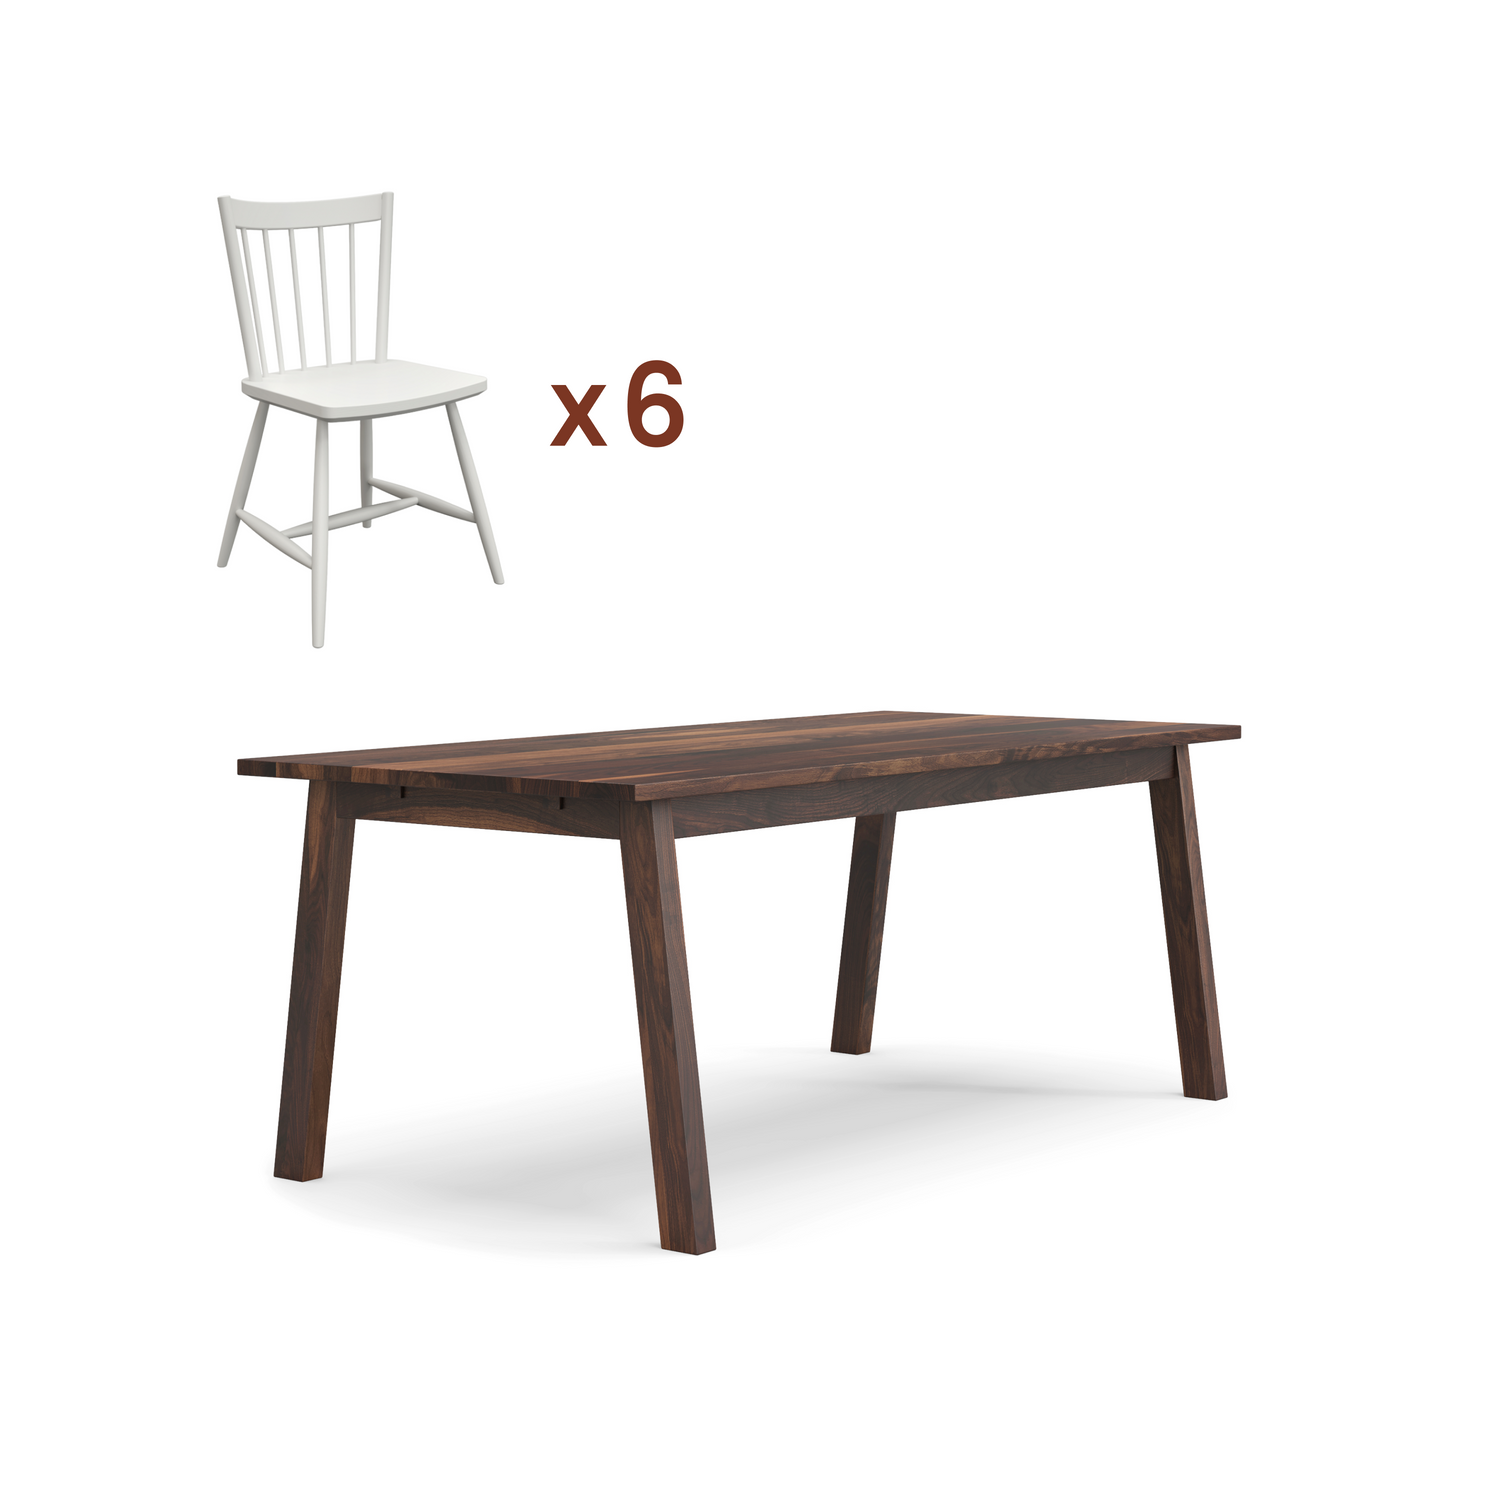 Luft table + chairs bundle